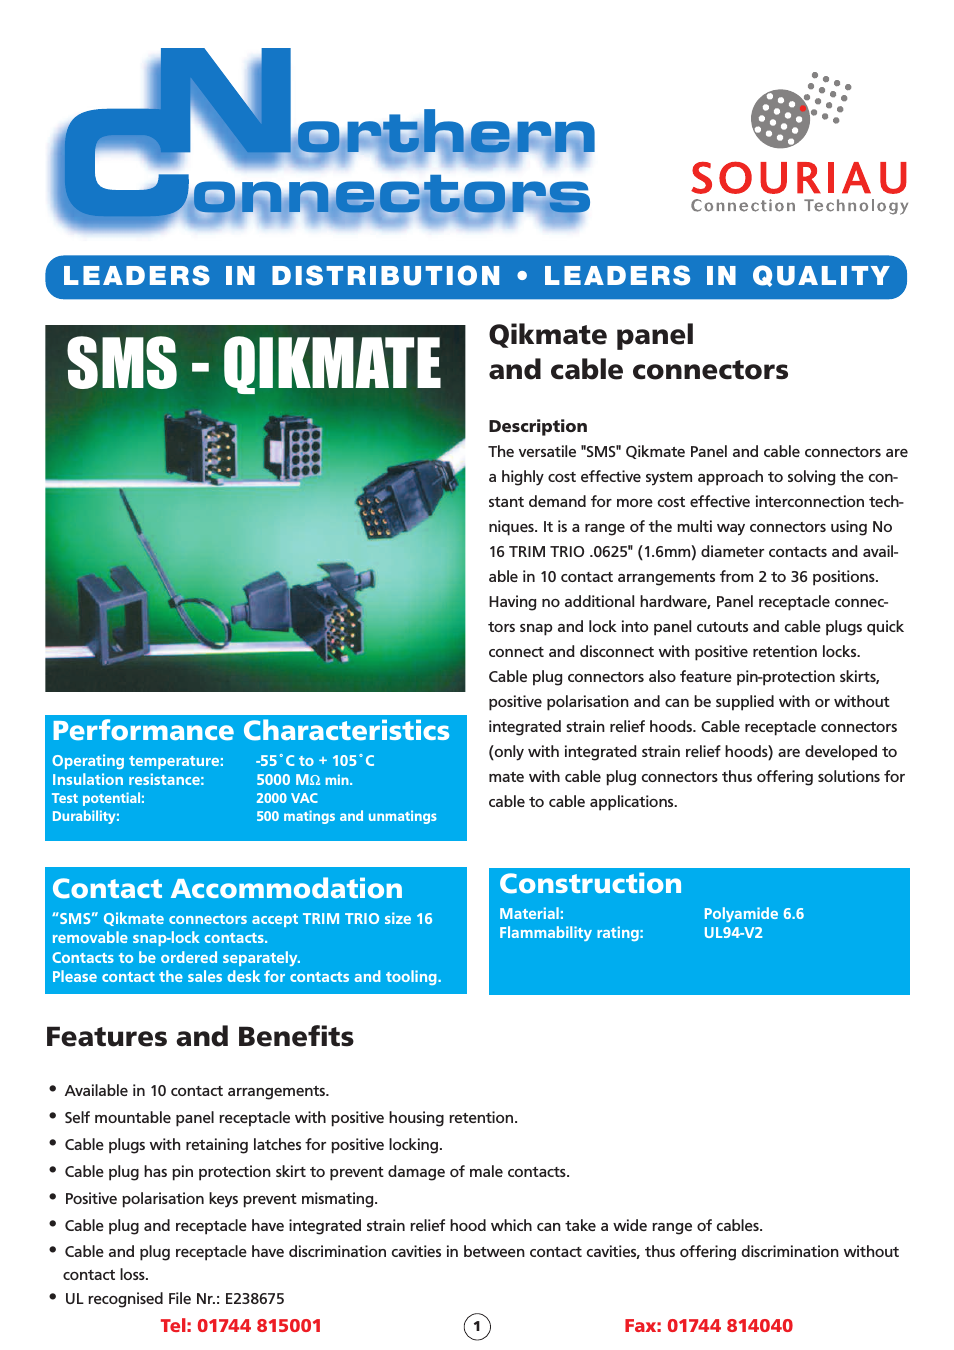 Souriau SMS Qikmate Panel and Cable Connectors